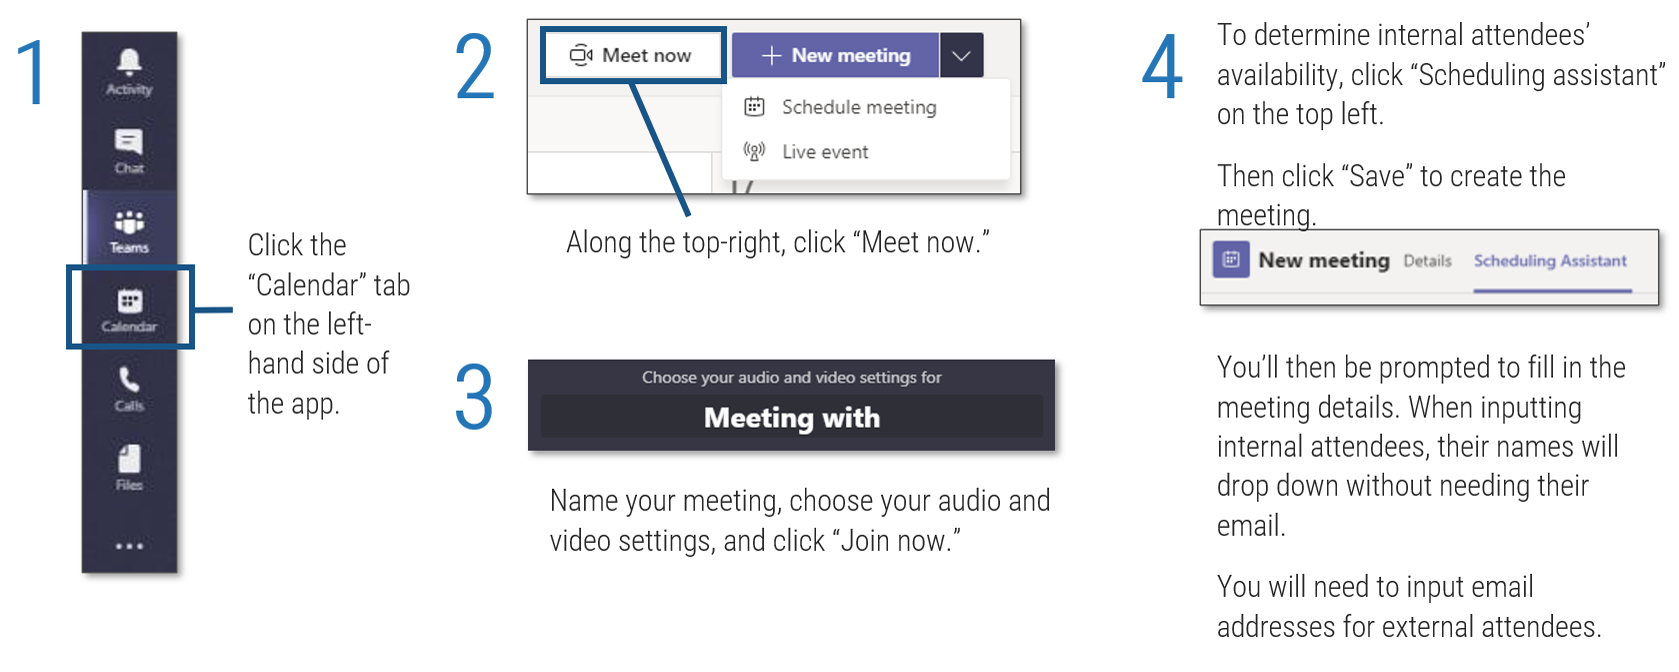 Screenshots detailing how to create an ad hoc meeting in Microsoft Teams, steps 1 to 4. Step 1:'Click the “Calendar” tab on the left-hand side of the app'. Step 2: 'Along the top-right, click “Meet now.”' Step 3: 'Name your meeting, choose your audio and video settings, and click “Join now.”'. Step 4: 'To determine internal attendees’ availability, click “Scheduling assistant” on the top left. Then click “Save” to create the meeting. You’ll then be prompted to fill in the meeting details. When inputting internal attendees, their names will drop down without needing their email. You will need to input email addresses for external attendees'.